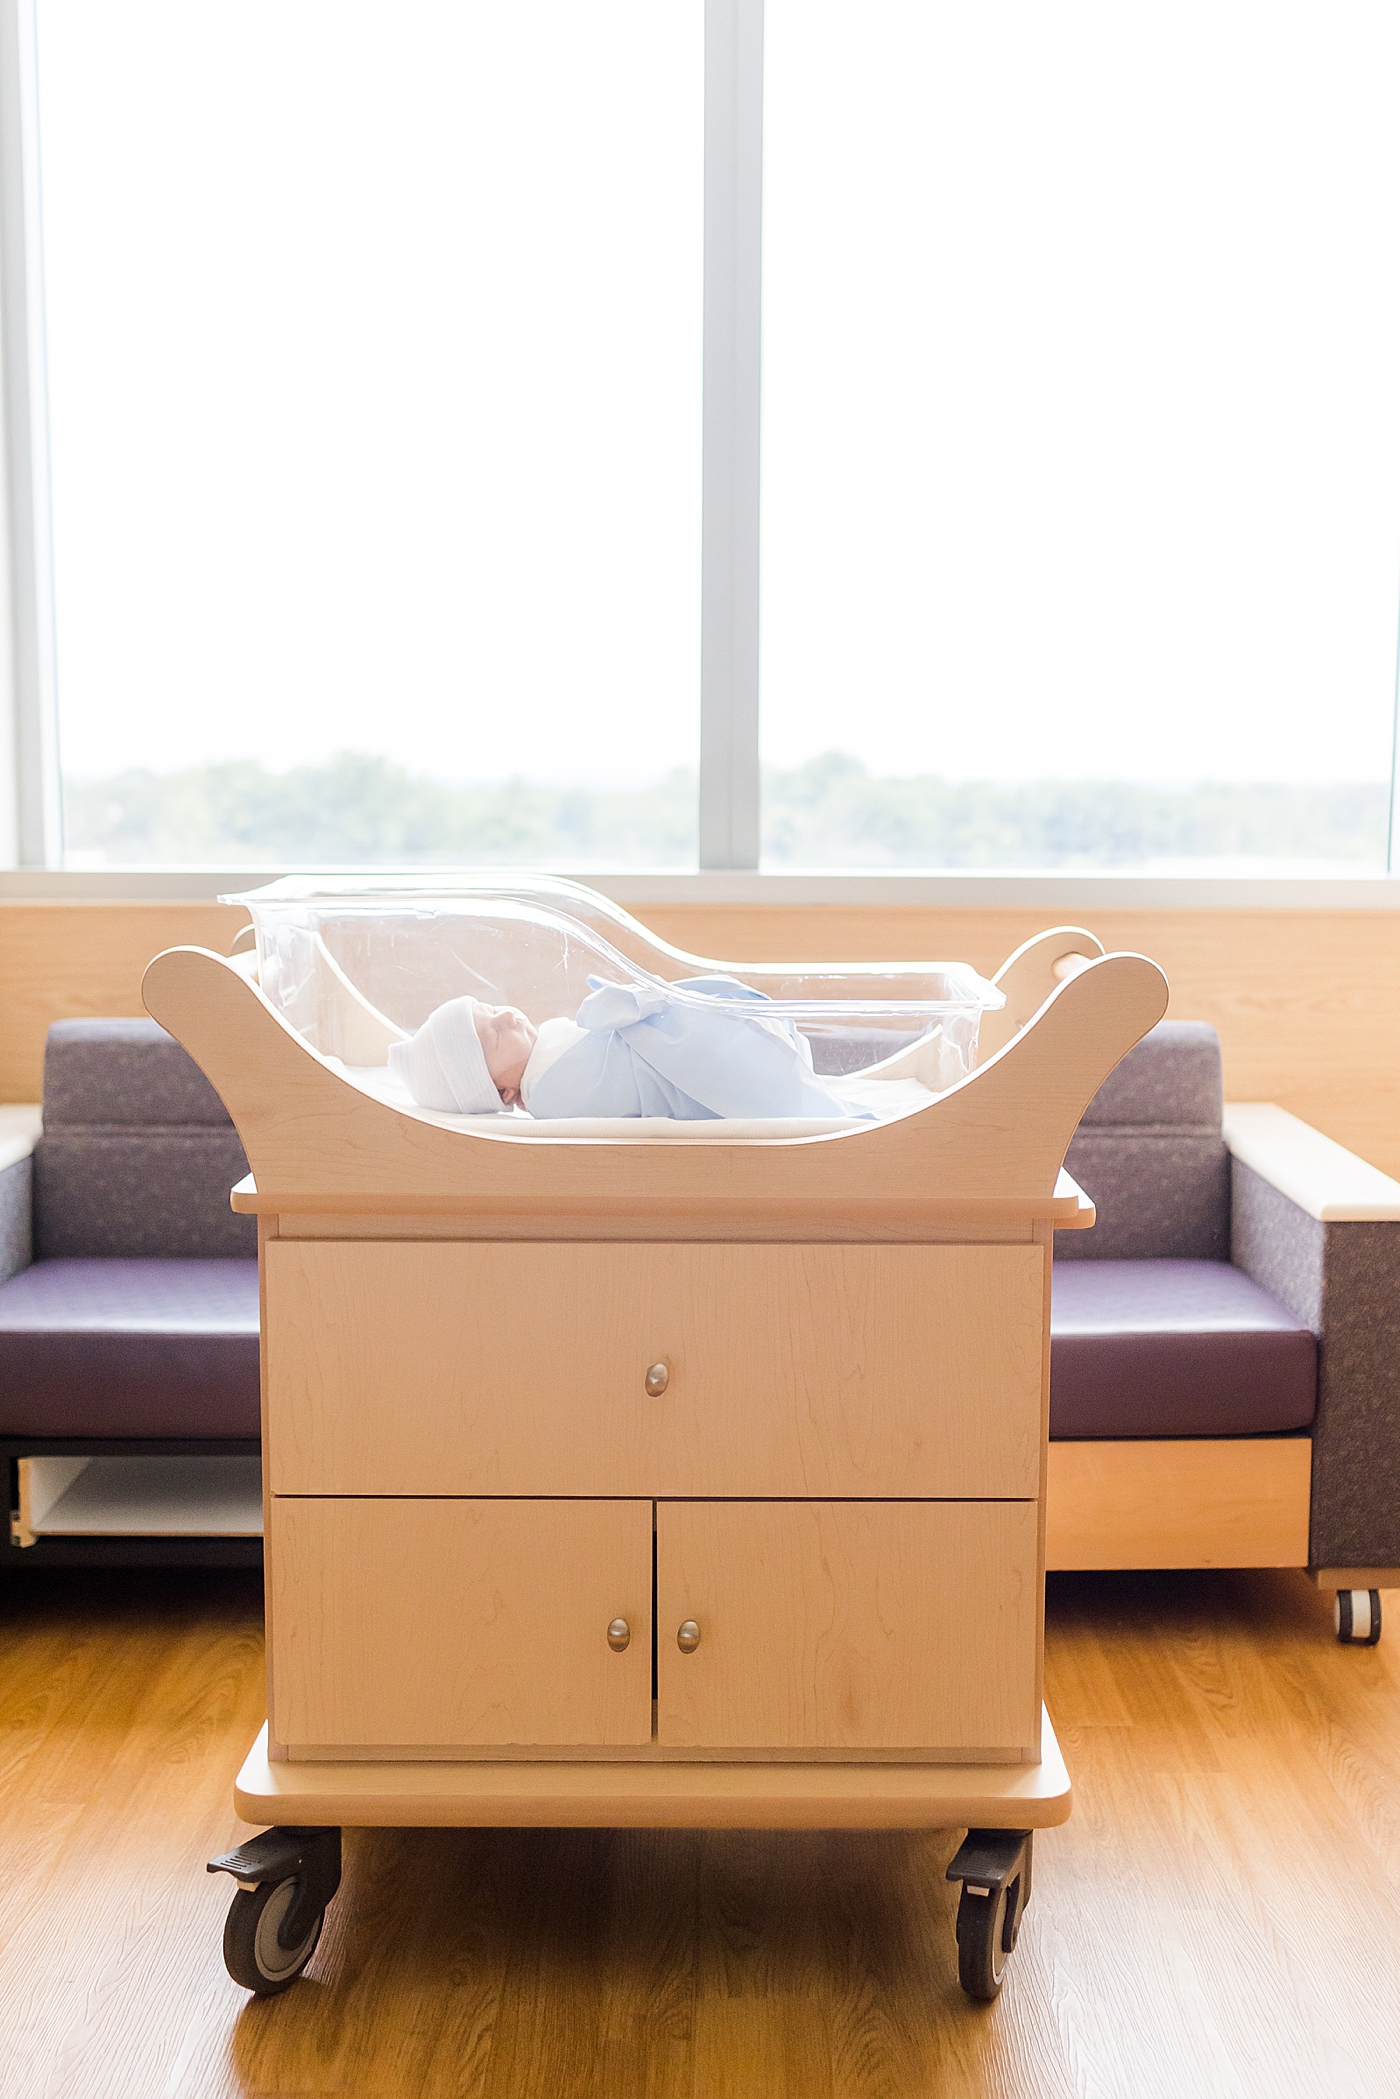 Baby in a hospital basinet | Image by Emily Gerald Photography